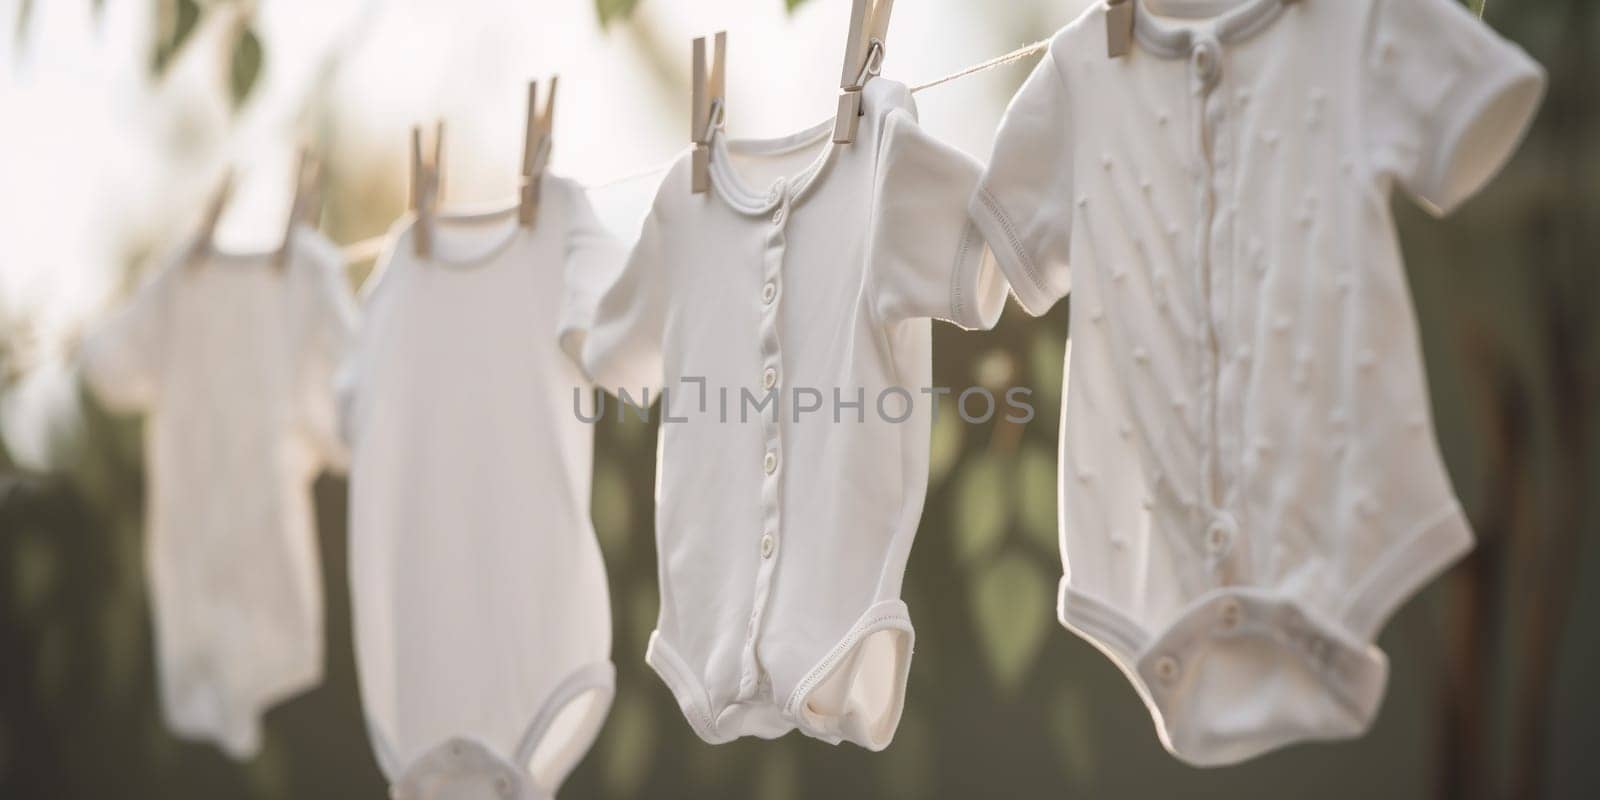 Baby Costumes For Newborns Are Dried On A Clothesline Outdoors